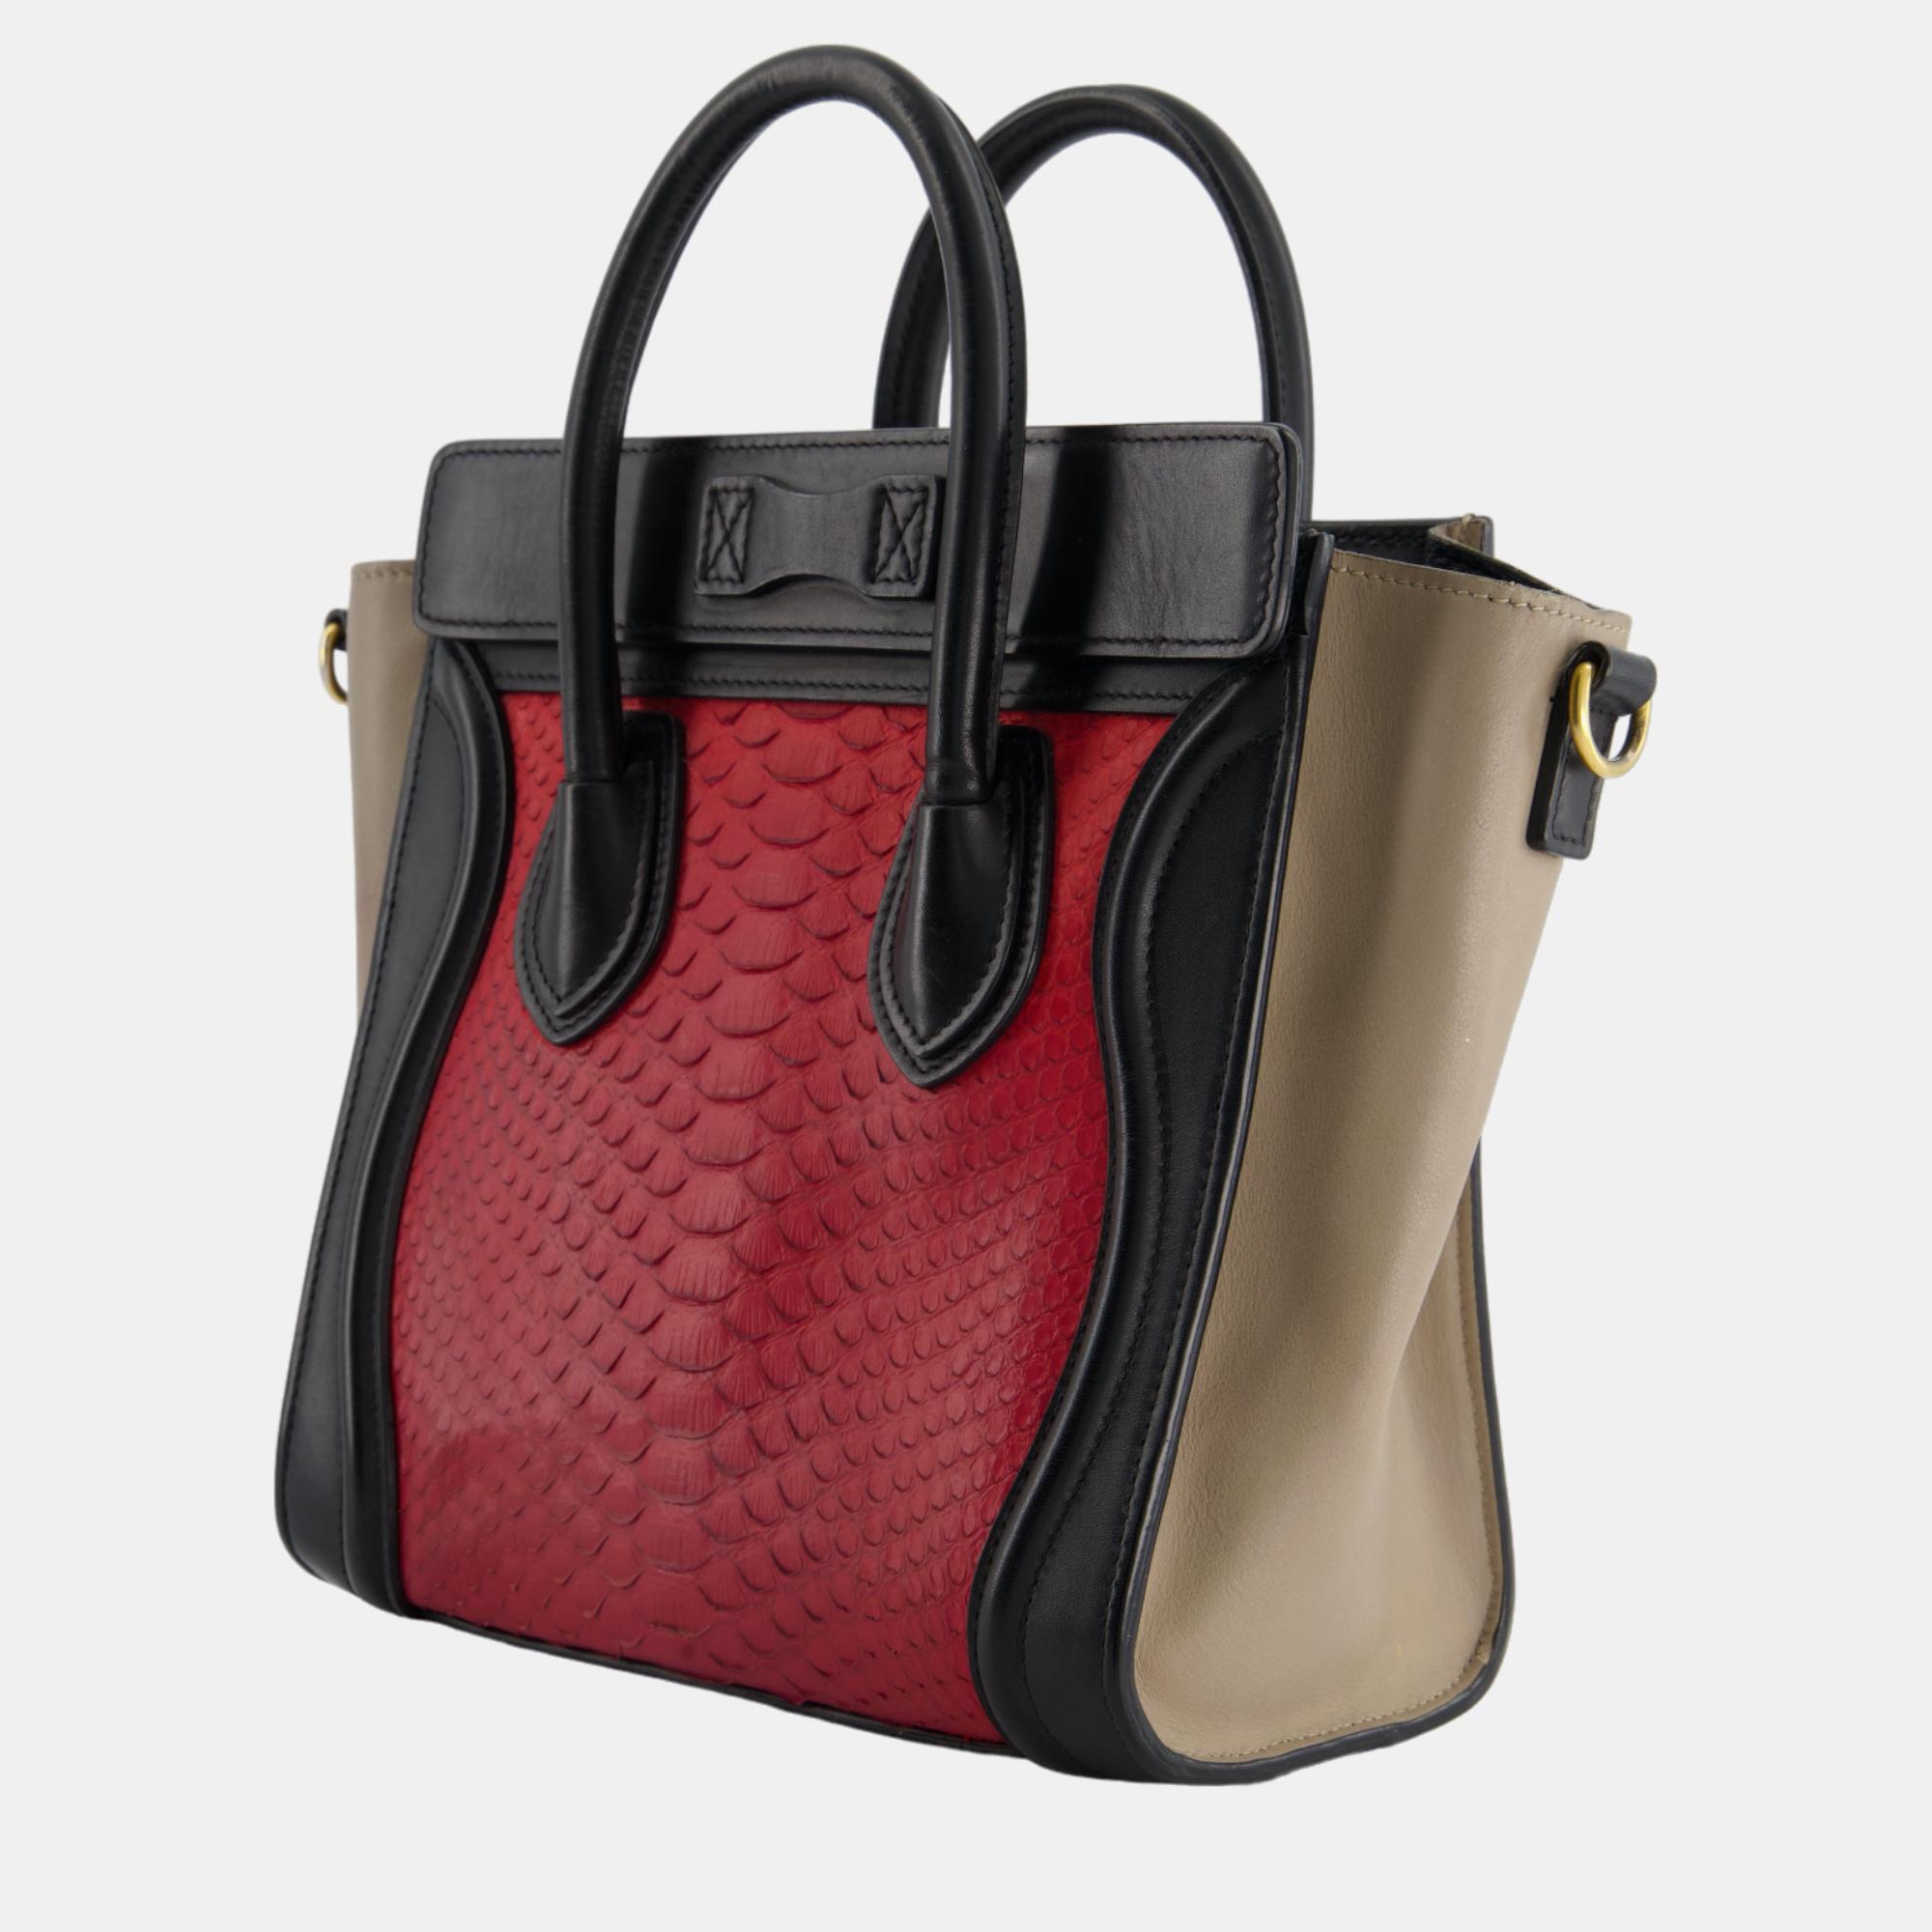 Celine Red, Black And Taupe Mini Luggage Hand Bag In Smooth Calfskin Leather And Python With Gold Hardware